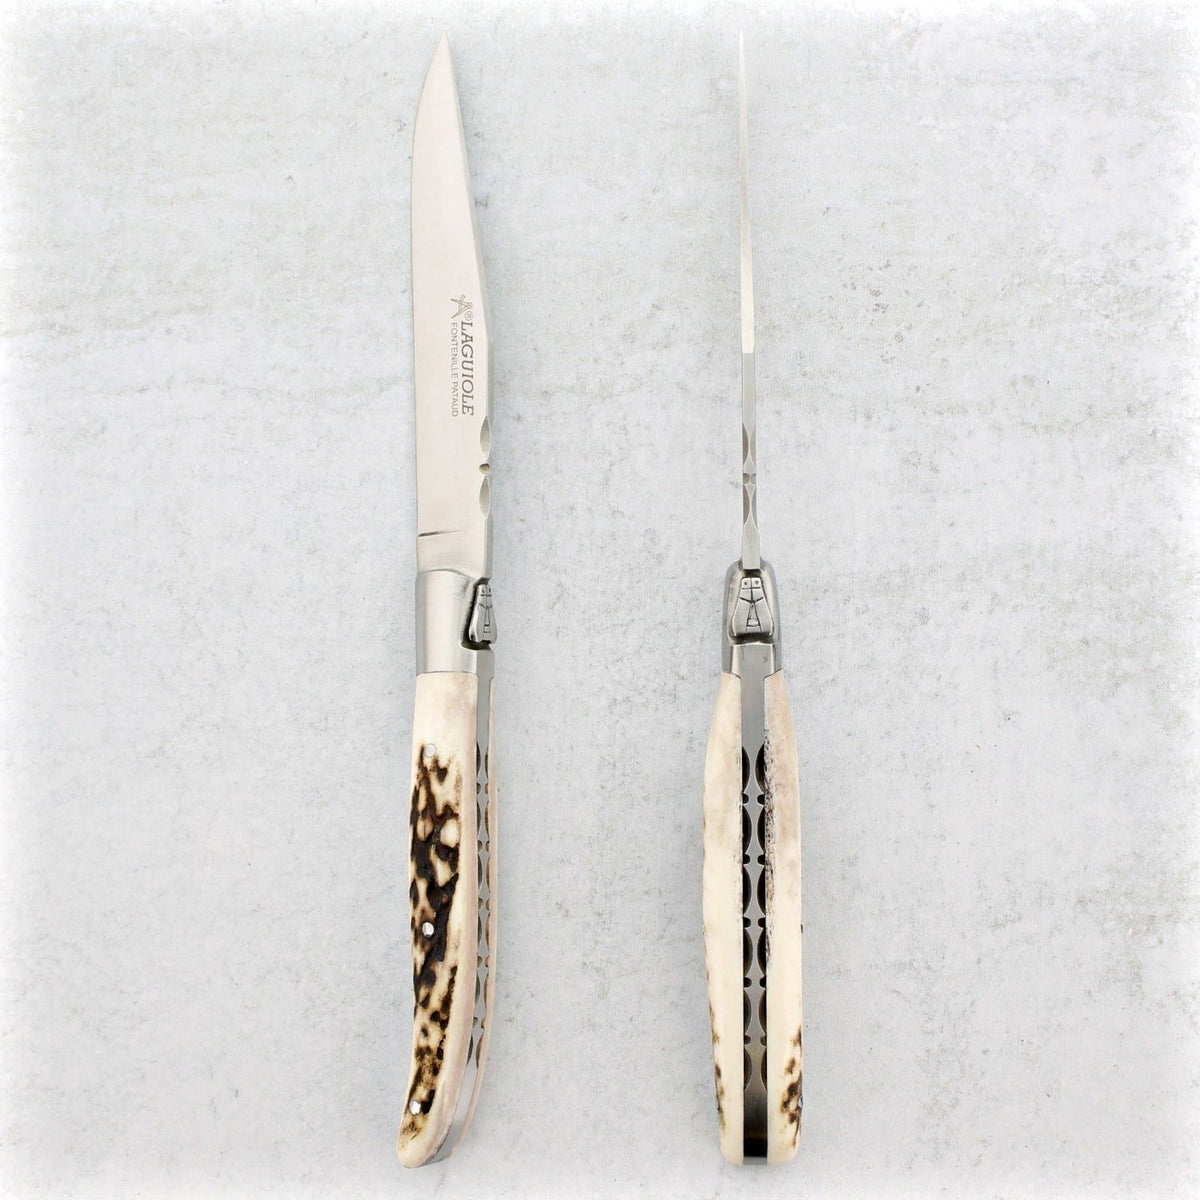 Laguiole Forged Steak Knives Deer Stag